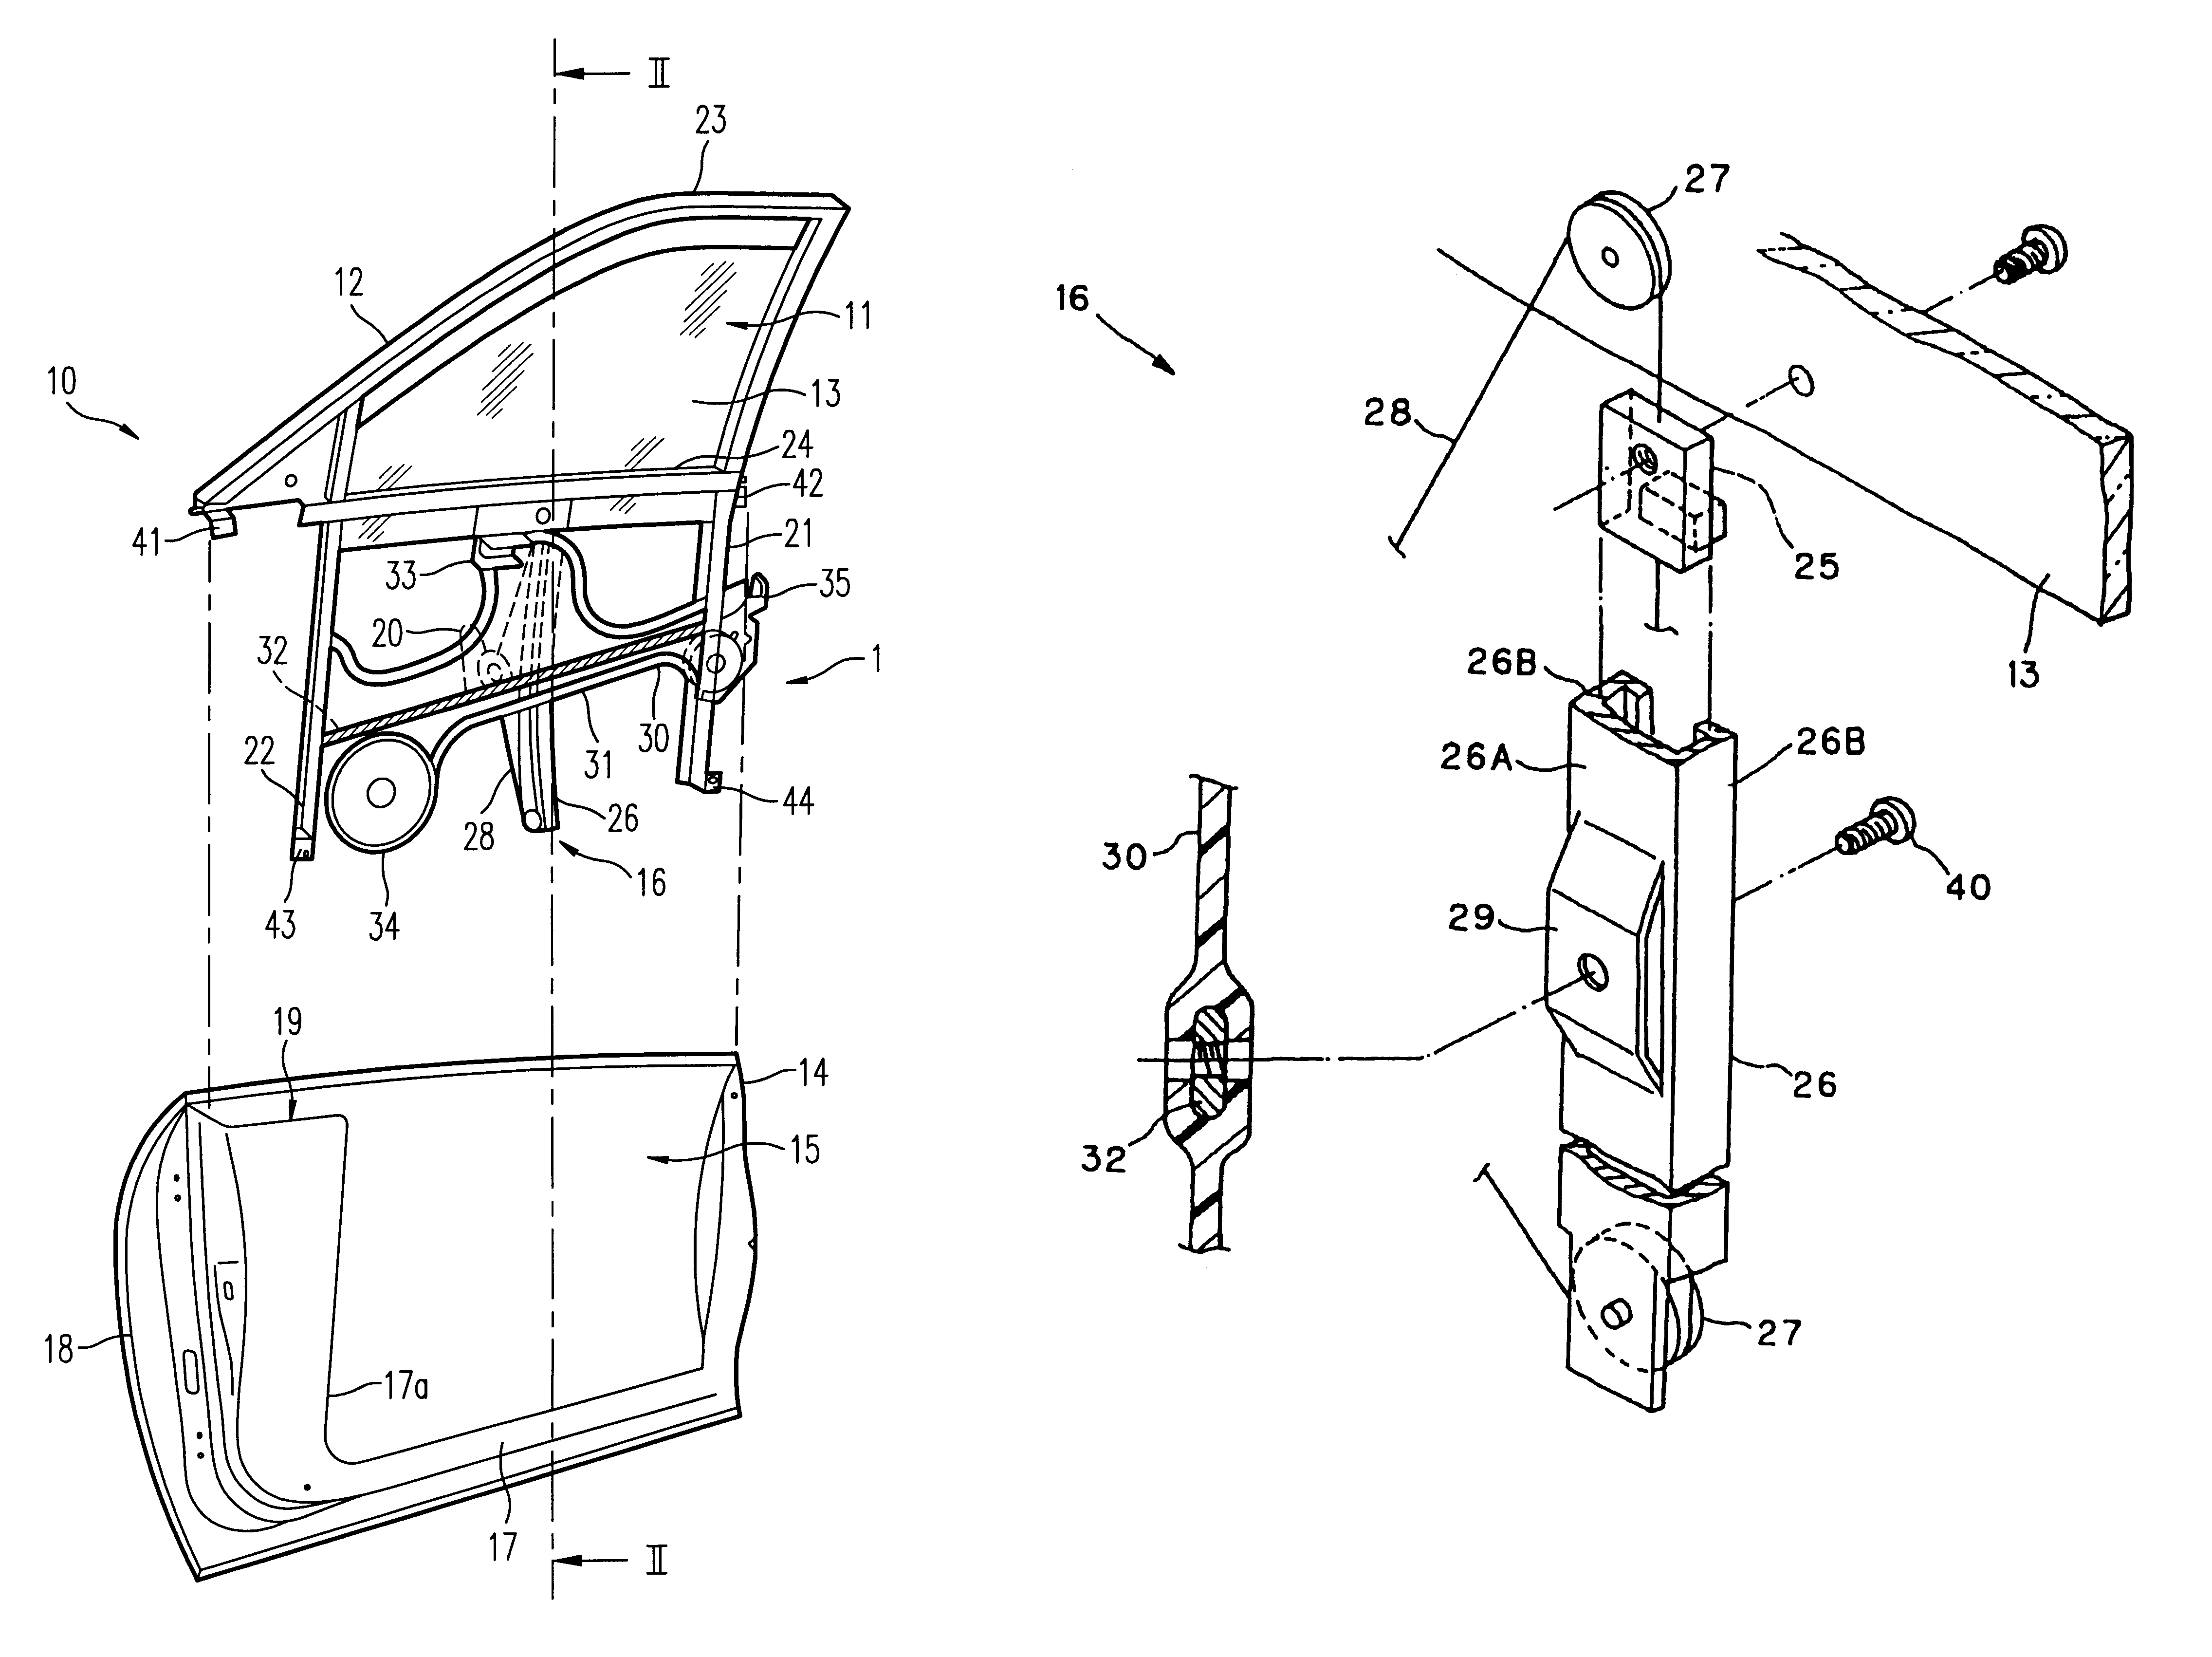 Vehicle door module including metallic elongated member incorporated within resin base plate